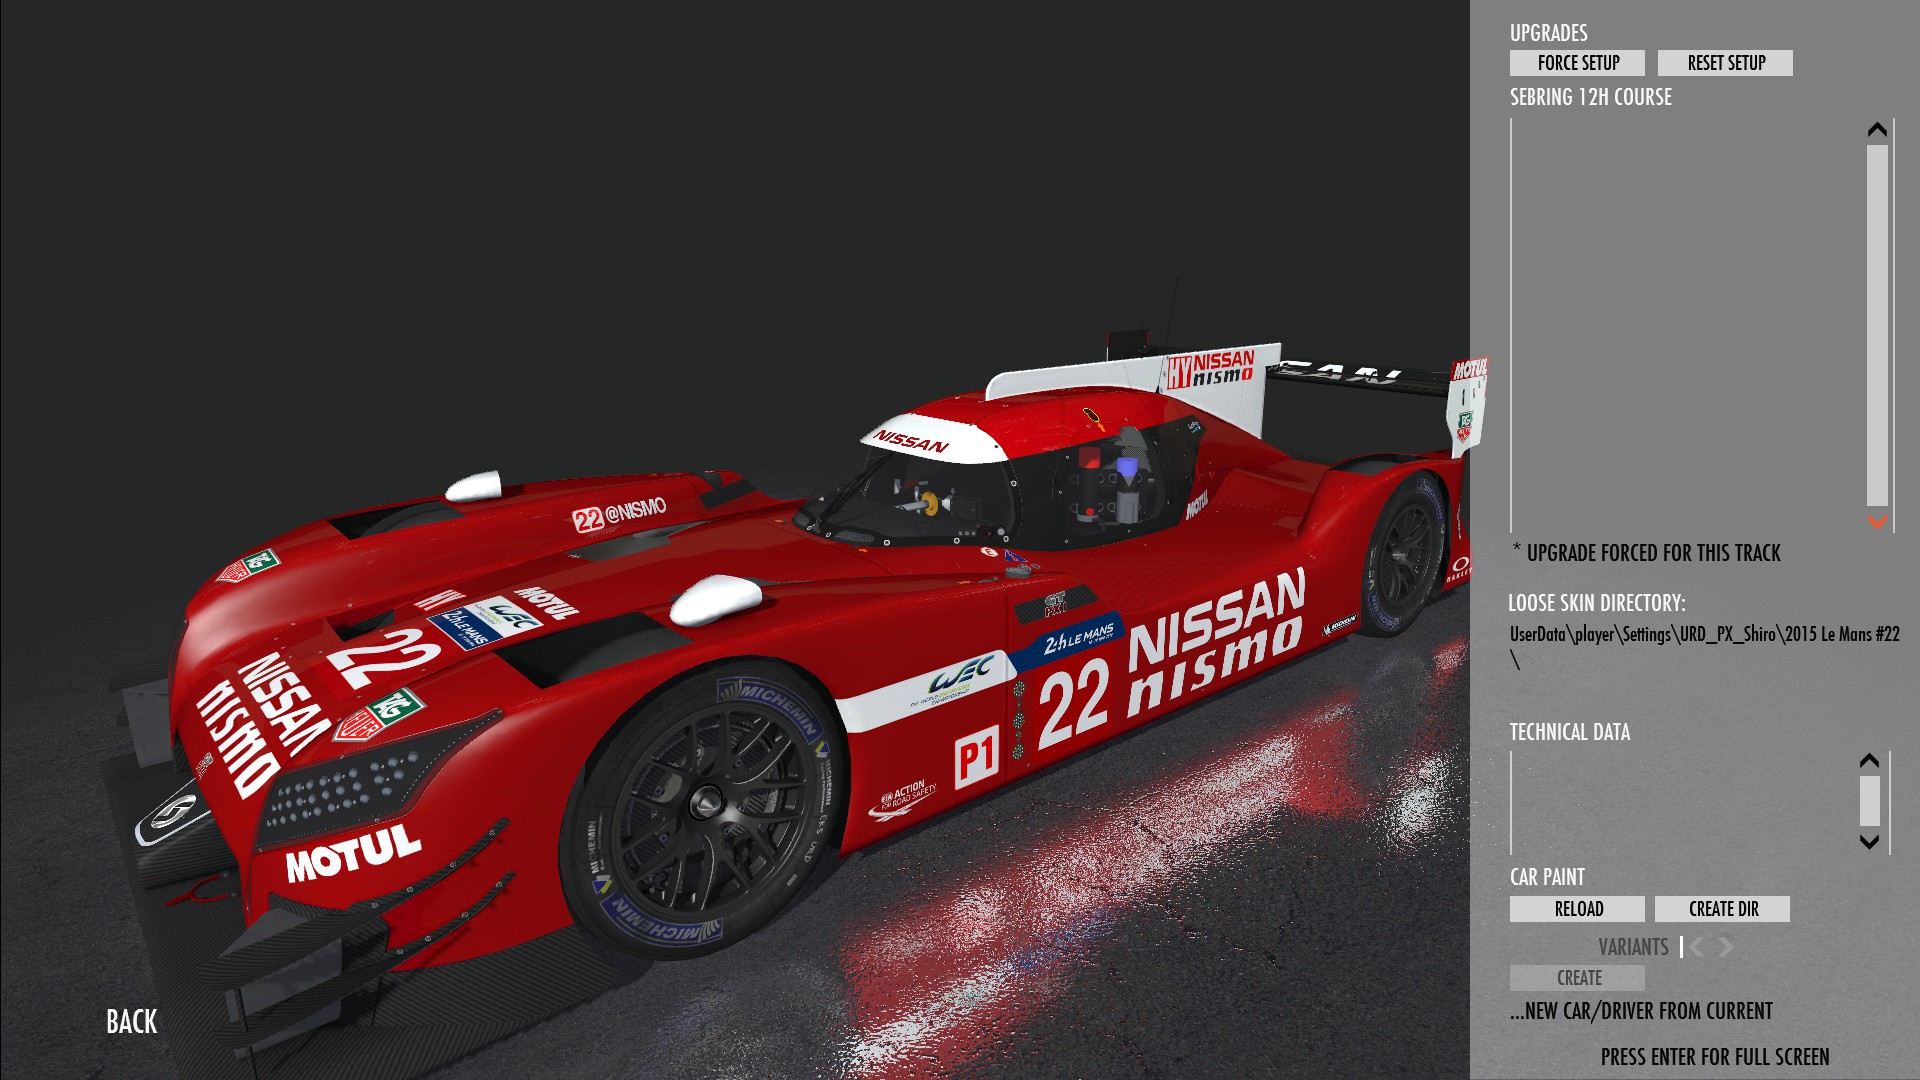 Nissan GT-R LM Nismo 2015 | RaceDepartment